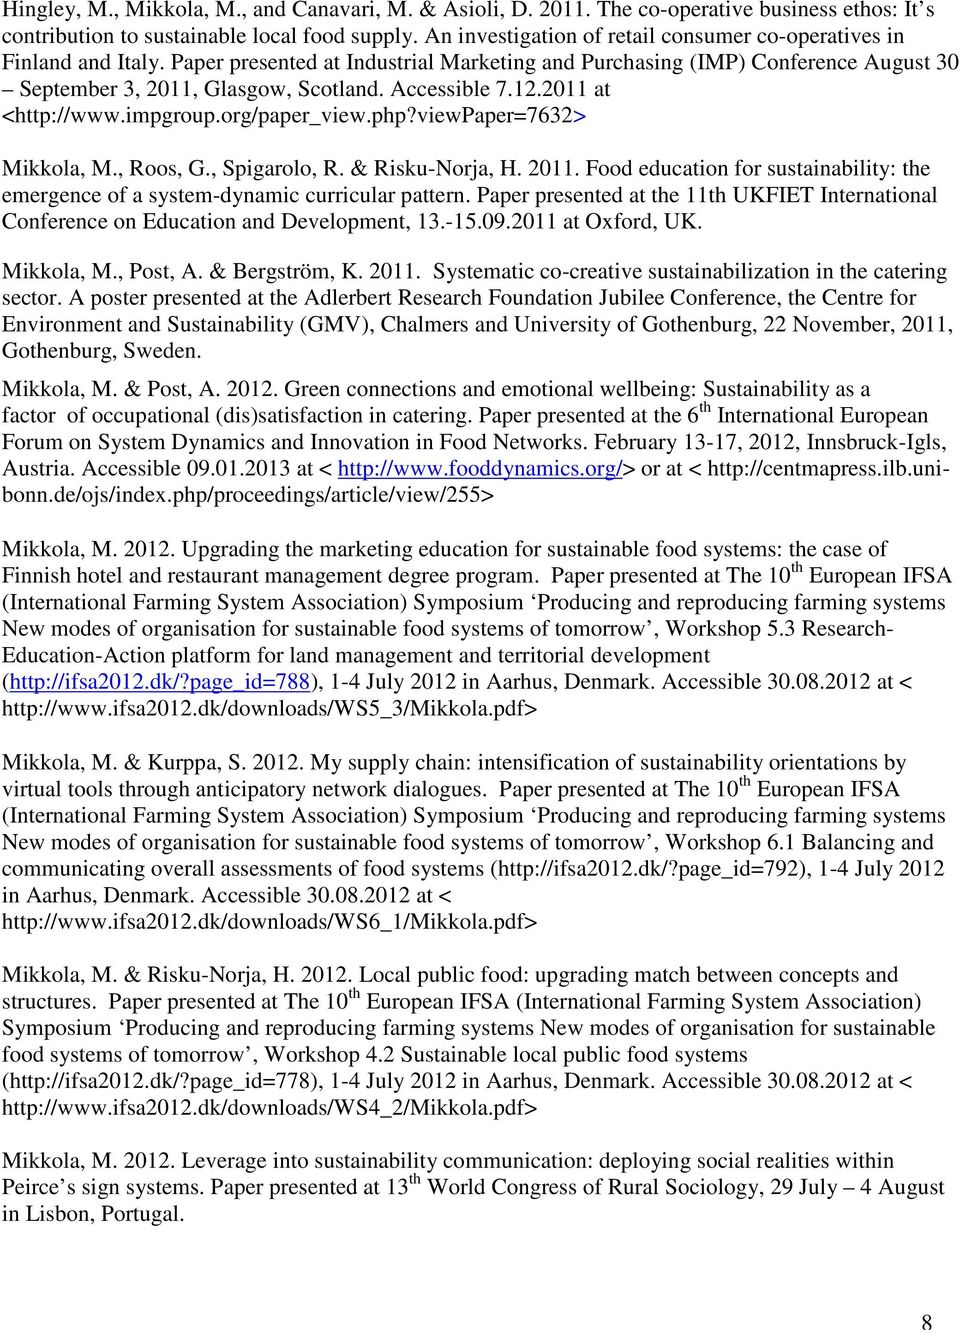 Accessible 7.12.2011 at <http://www.impgroup.org/paper_view.php?viewpaper=7632> Mikkola, M., Roos, G., Spigarolo, R. & Risku-Norja, H. 2011.